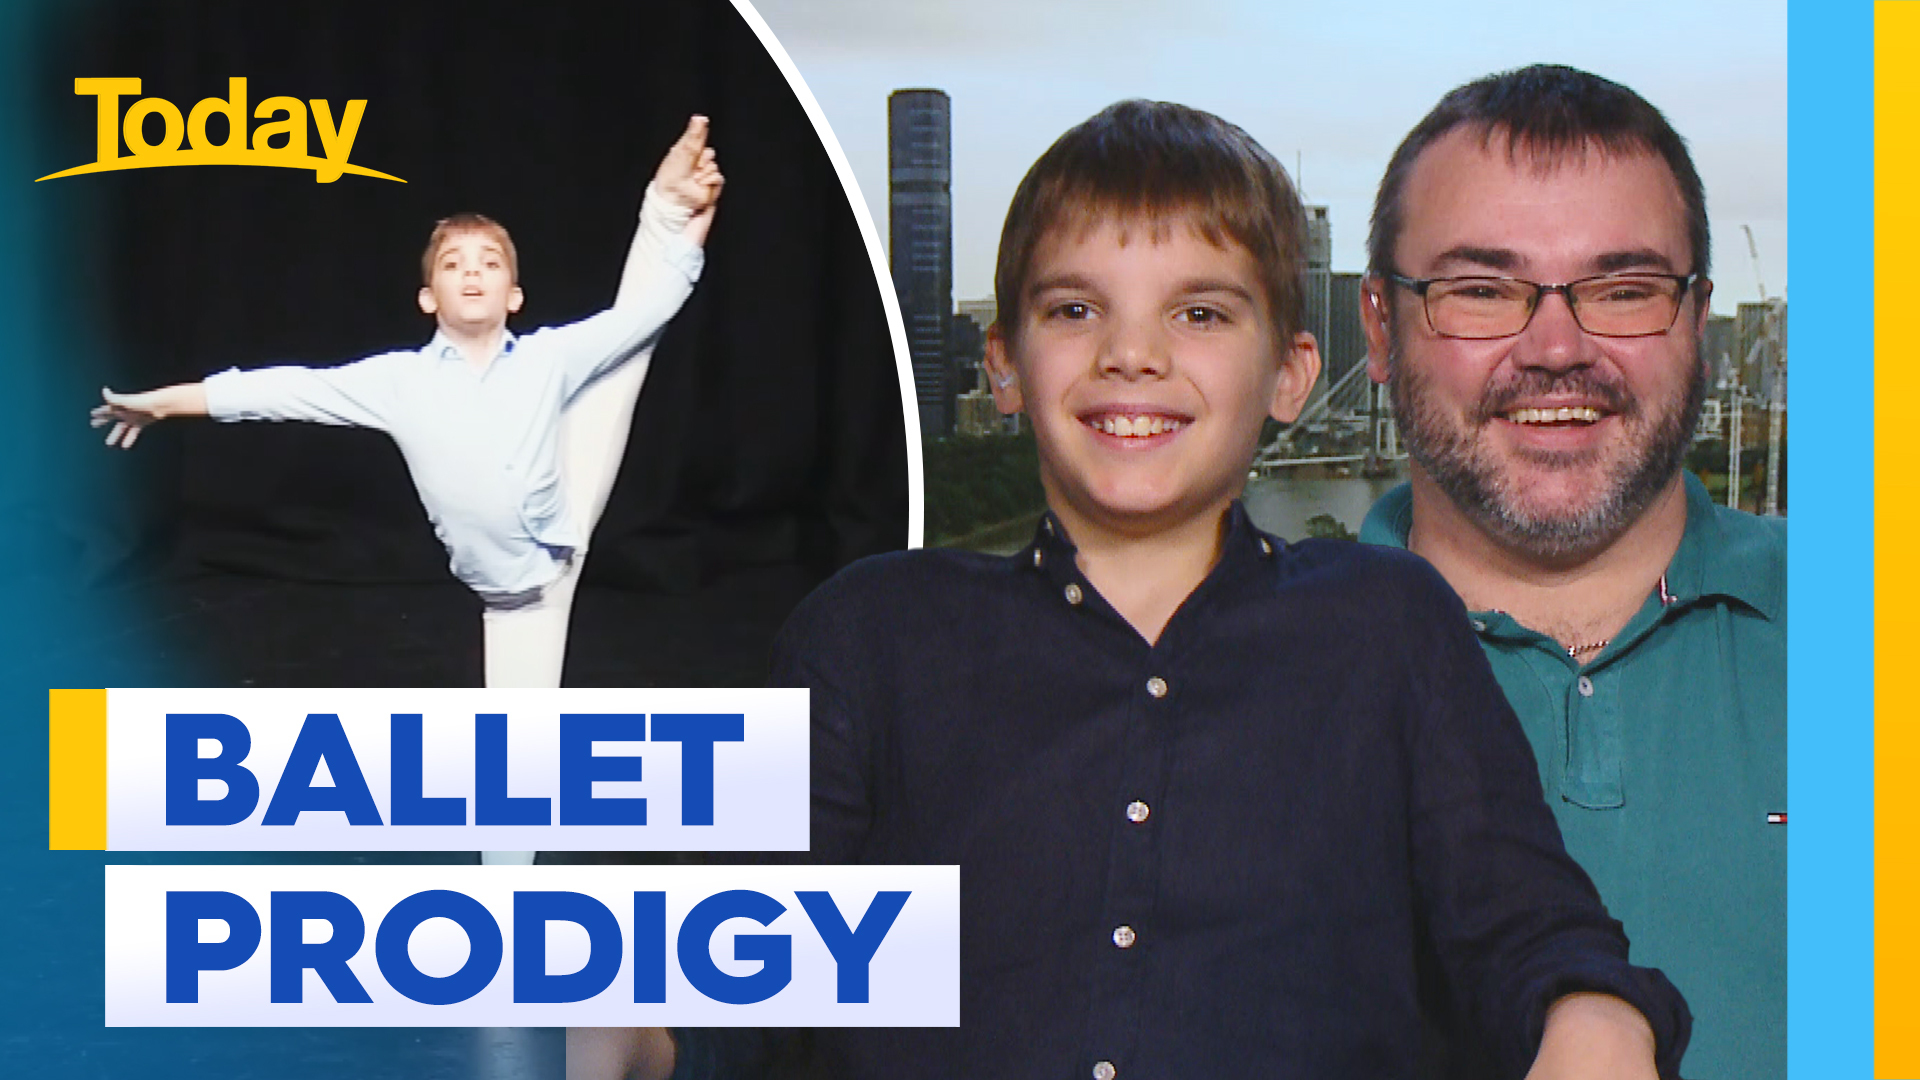 Nine-year-old ballet prodigy sets his sights on the Big Apple